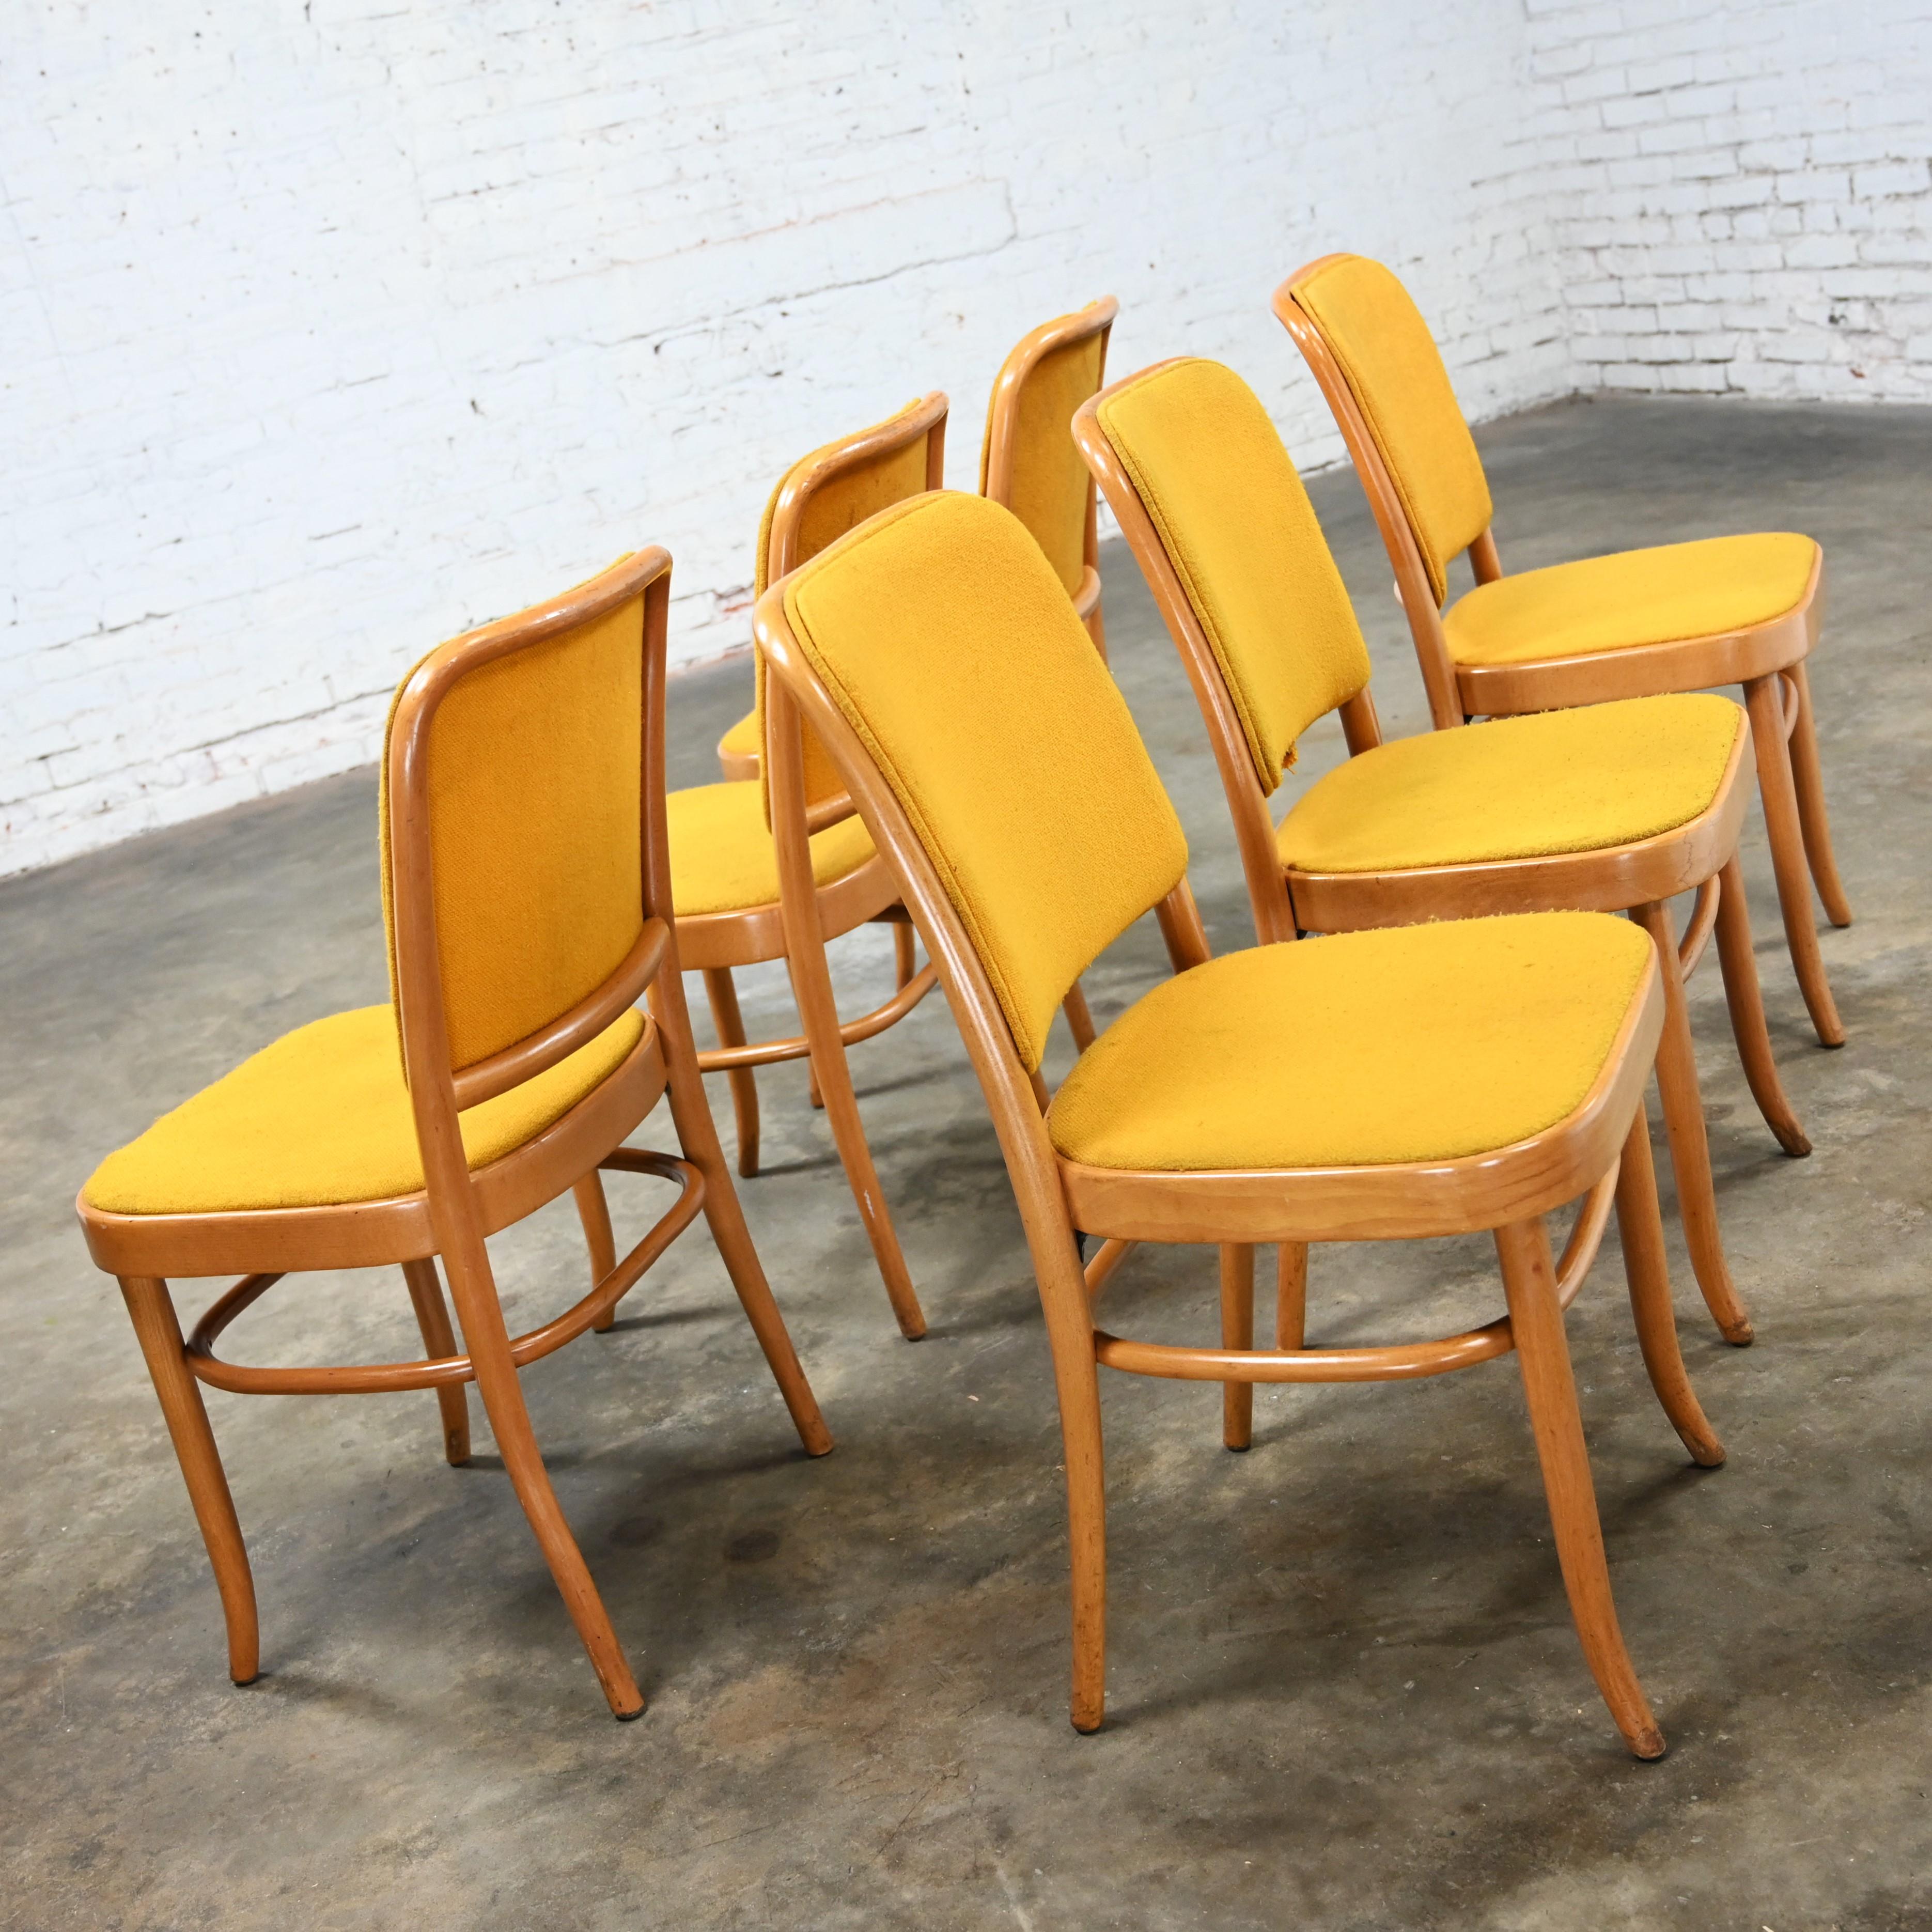 Wonderful vintage Bauhaus beech bentwood frame Thonet Josef Hoffman Prague 811 style armless side dining chairs by Falcon Products Inc., set of 6. Beautiful condition, keeping in mind that these are vintage and not new so will have signs of use and